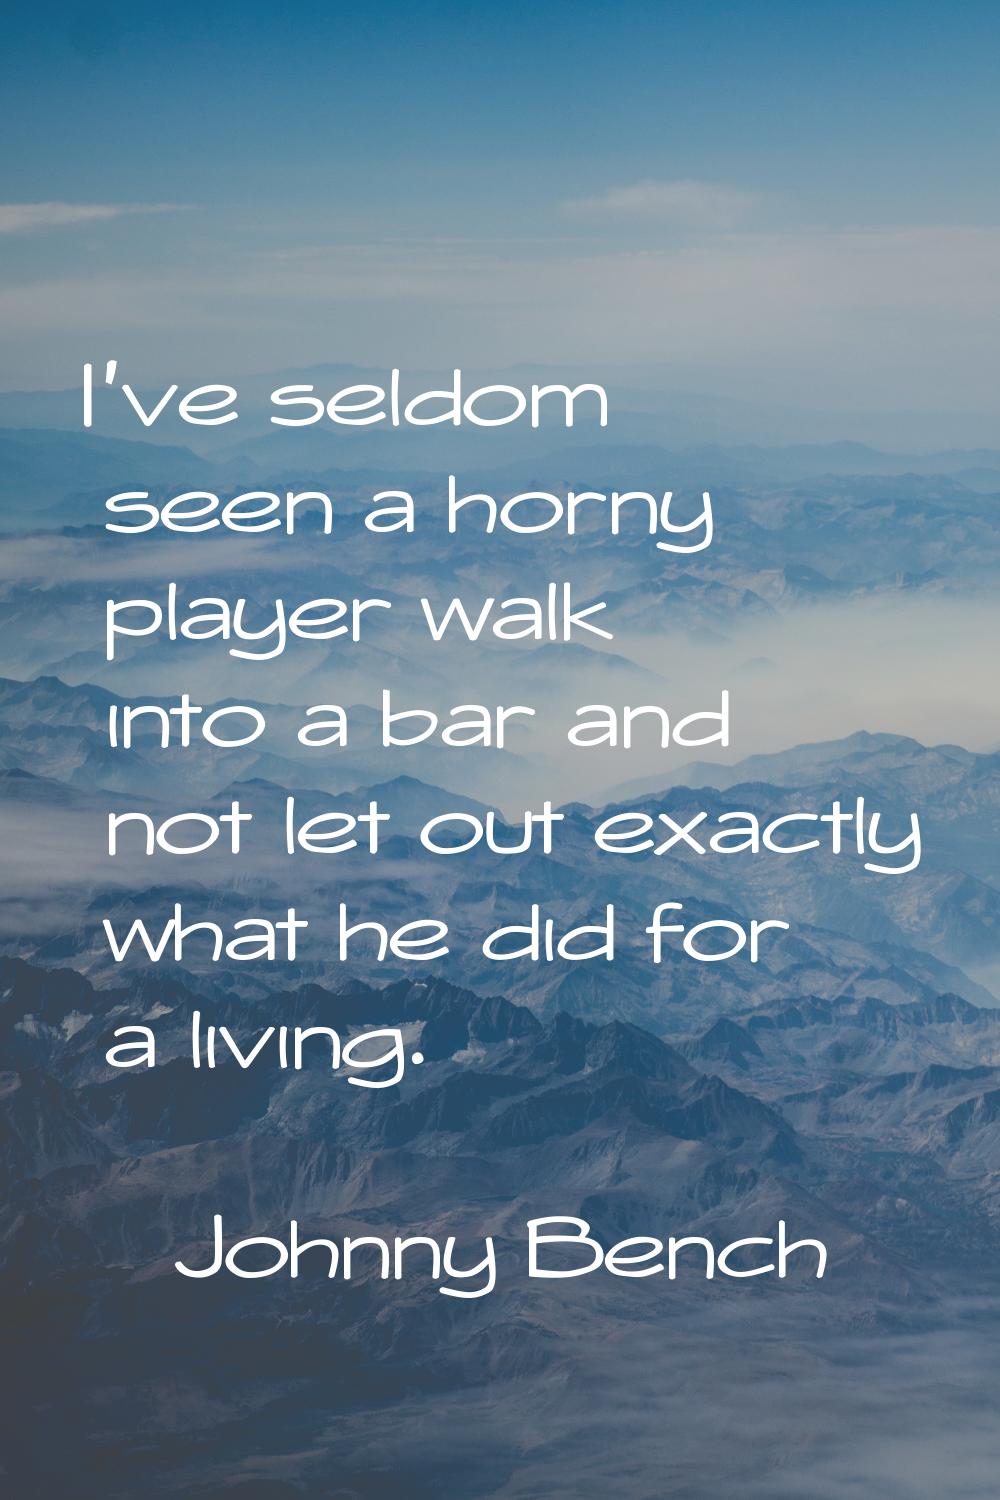 I've seldom seen a horny player walk into a bar and not let out exactly what he did for a living.